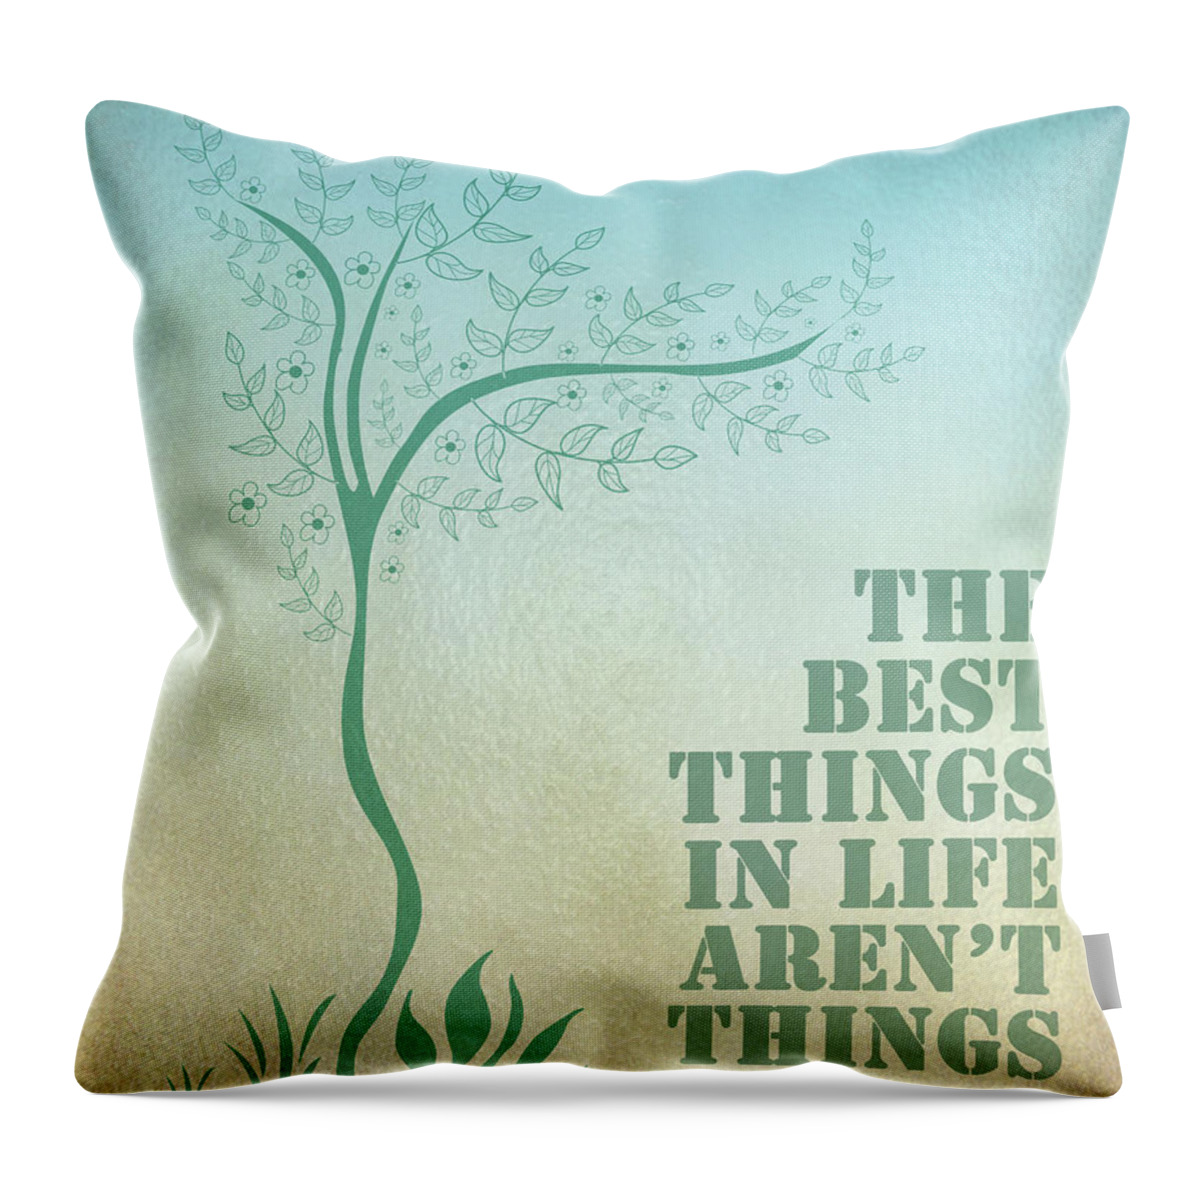 The Best Things In Life Aren't Things Throw Pillow featuring the digital art The best Things In Life Aren't Things by Georgia Clare